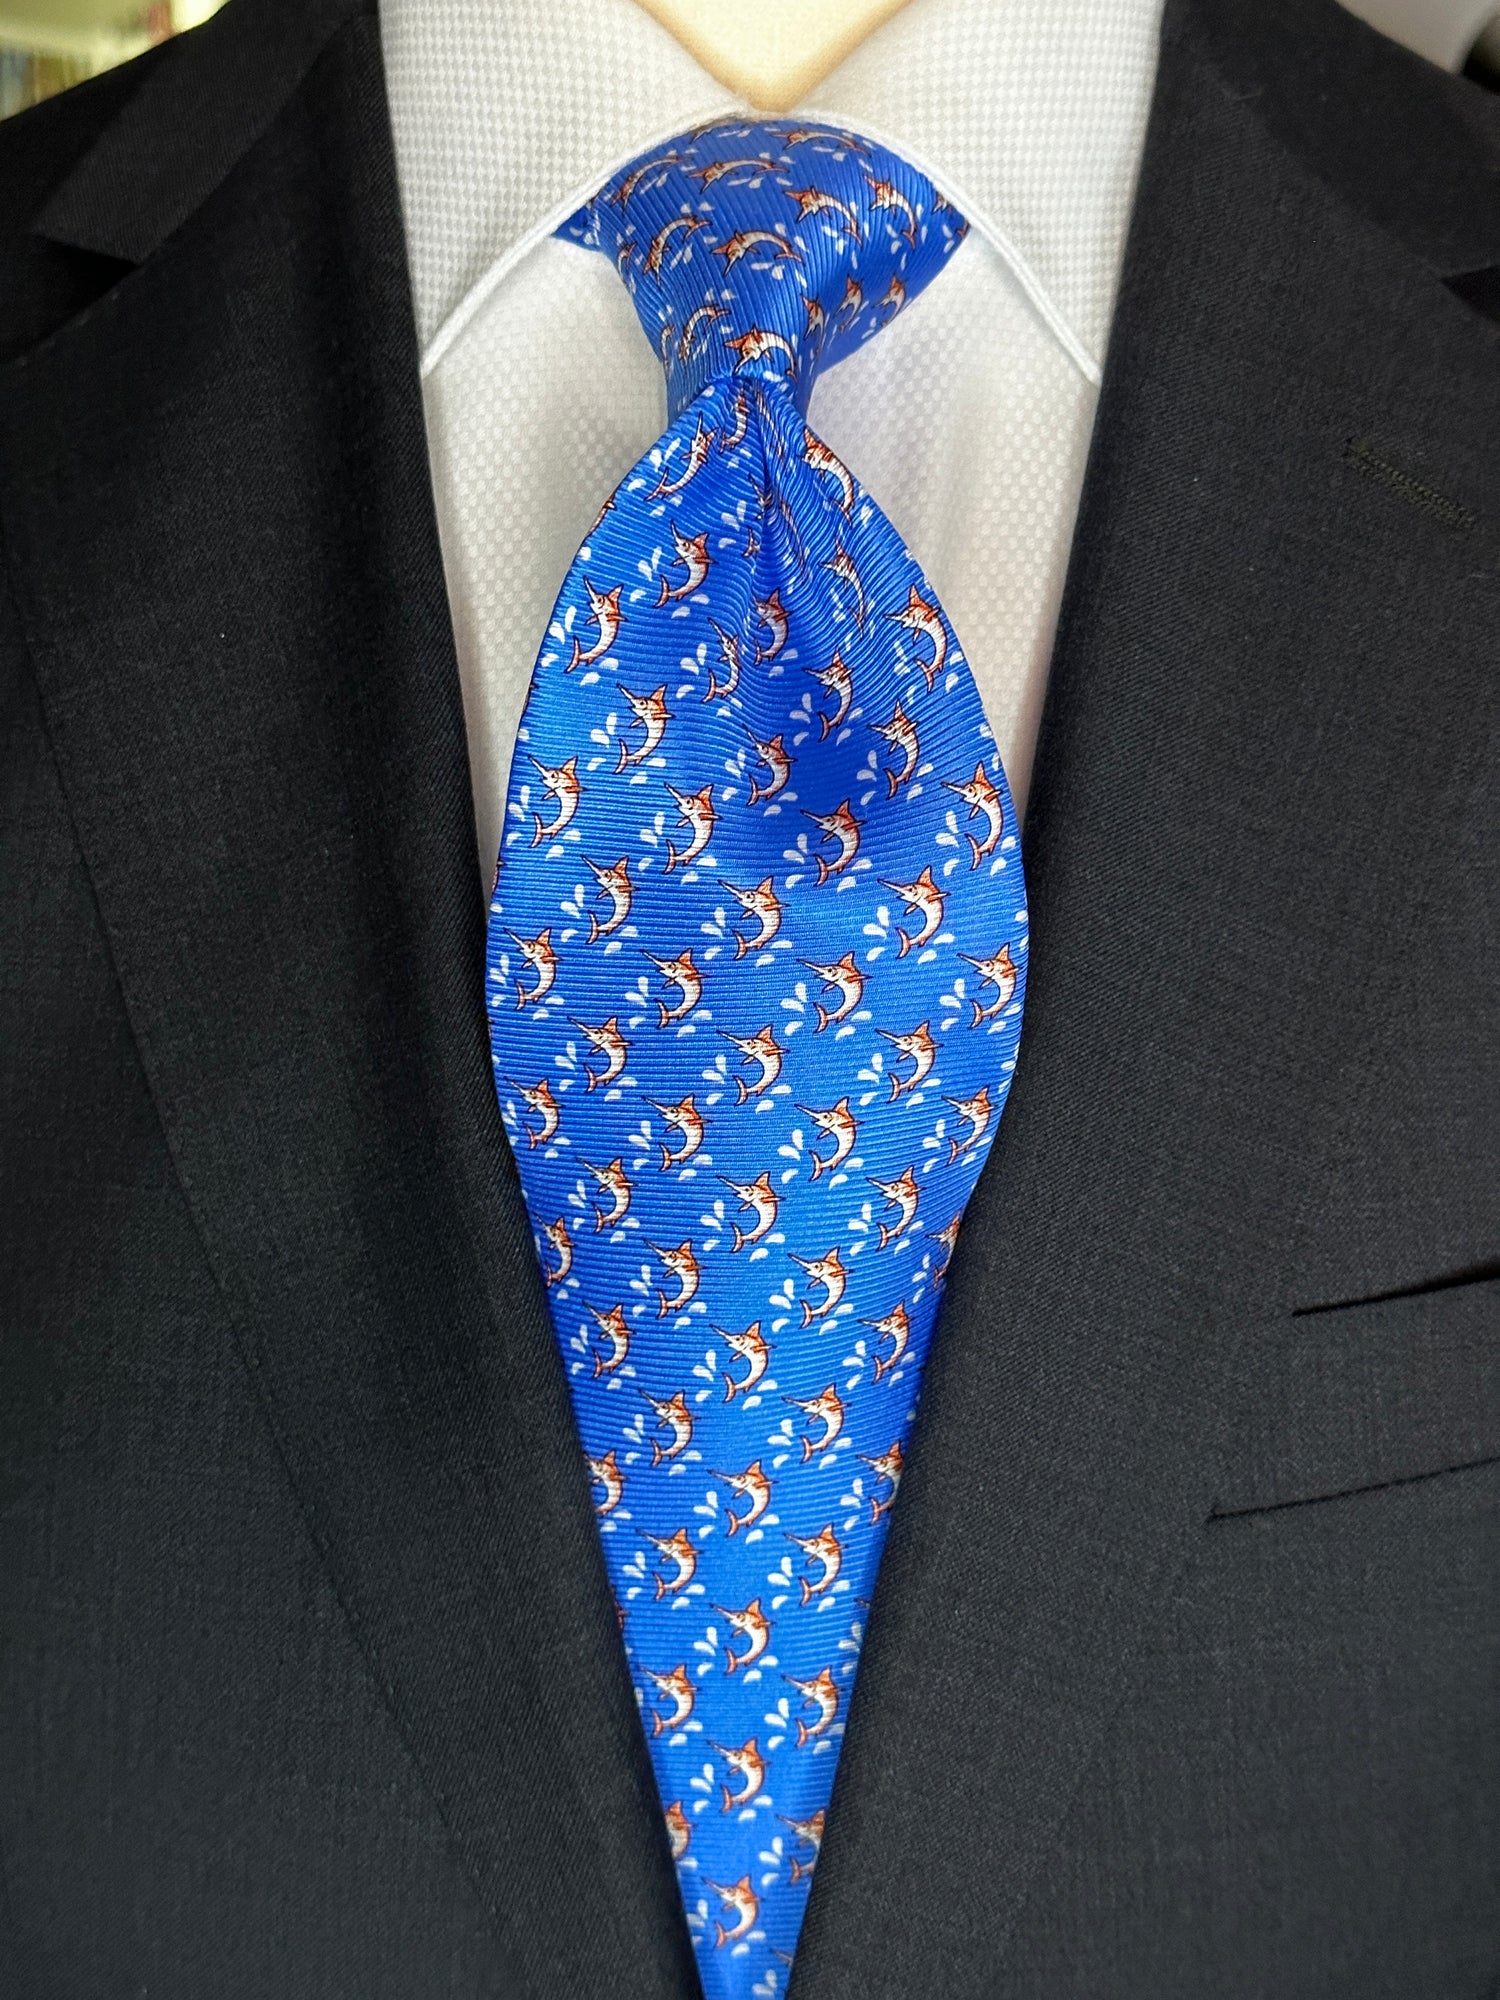 This beautiful 100% silk twill necktie features the swordfish motif with small splashes of water. Being a geometric type pattern, this tie is most interesting because people tend to look twice to realize that the pattern is made up of orange/tan swordfish. Hermes style.